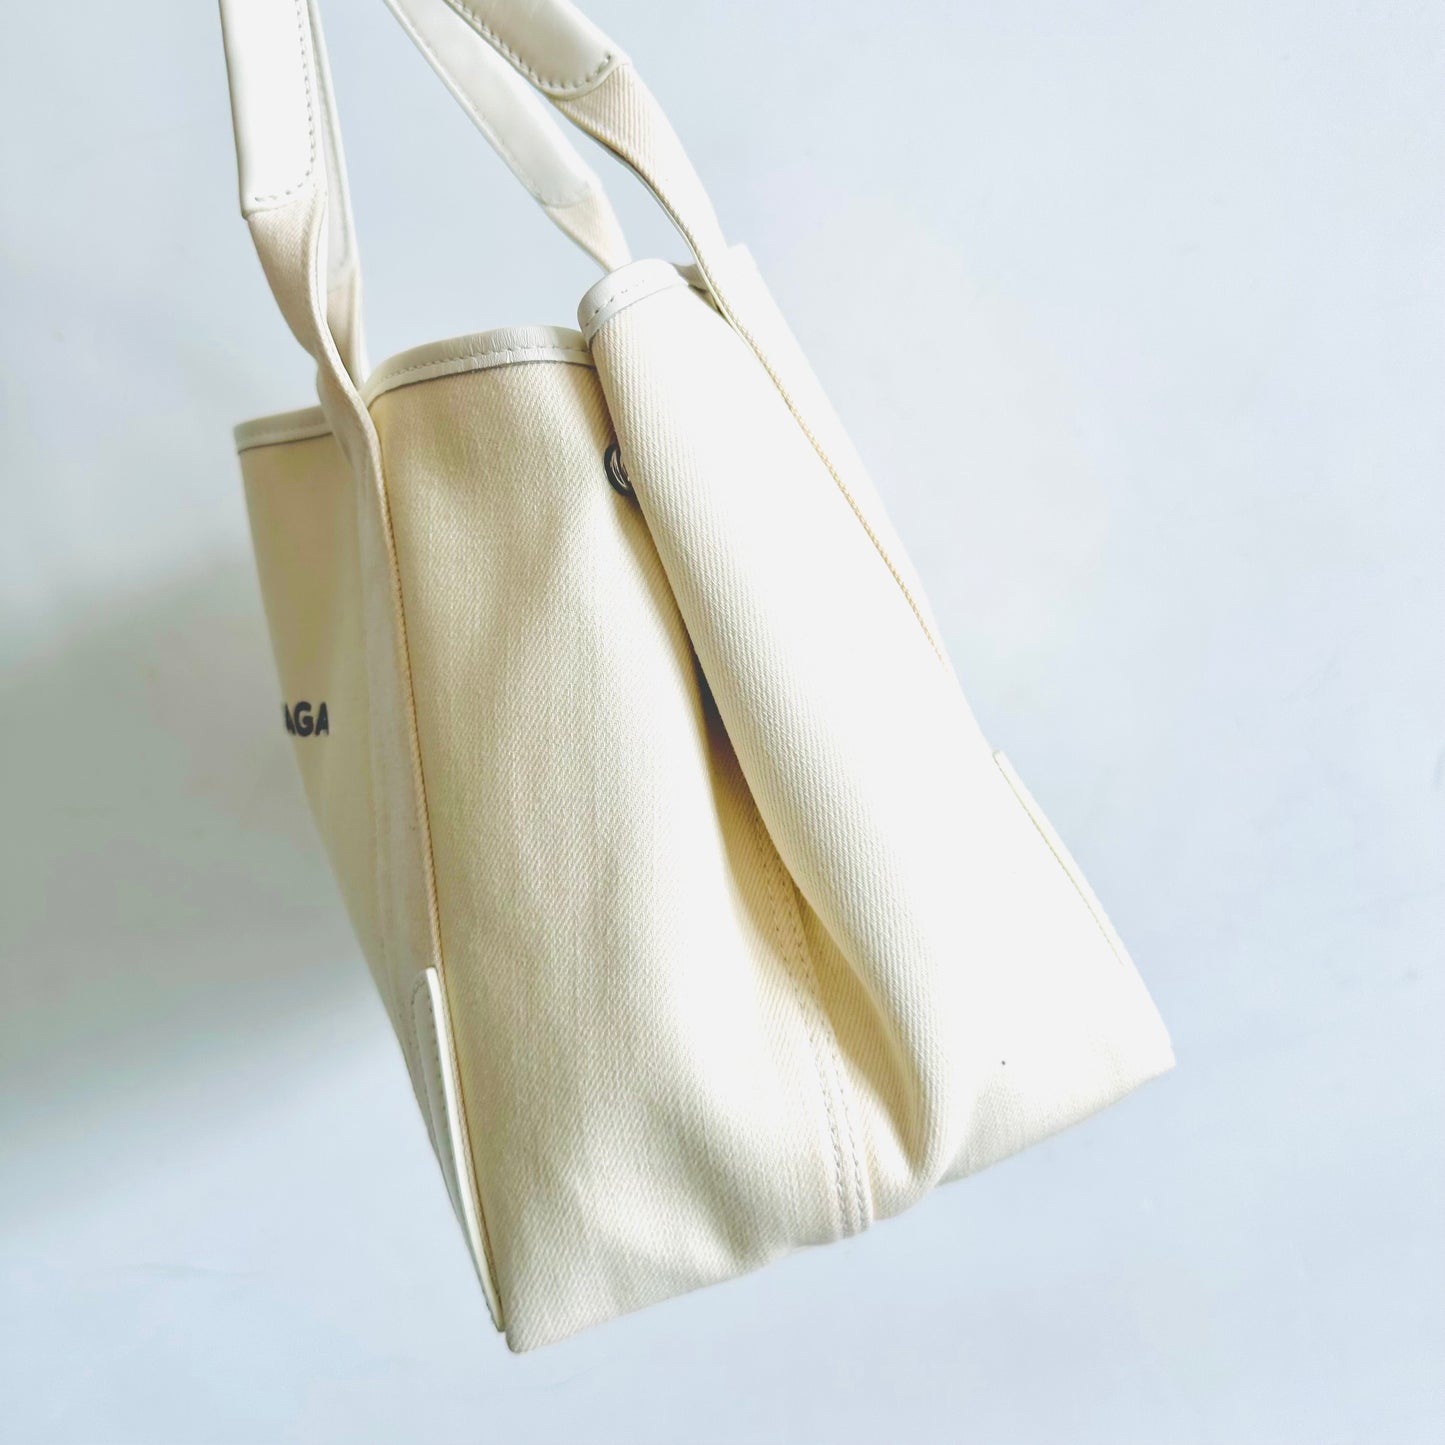 Balenciaga Cabas White Small S Structured Shoulder Shopper Tote Bag With Pouch